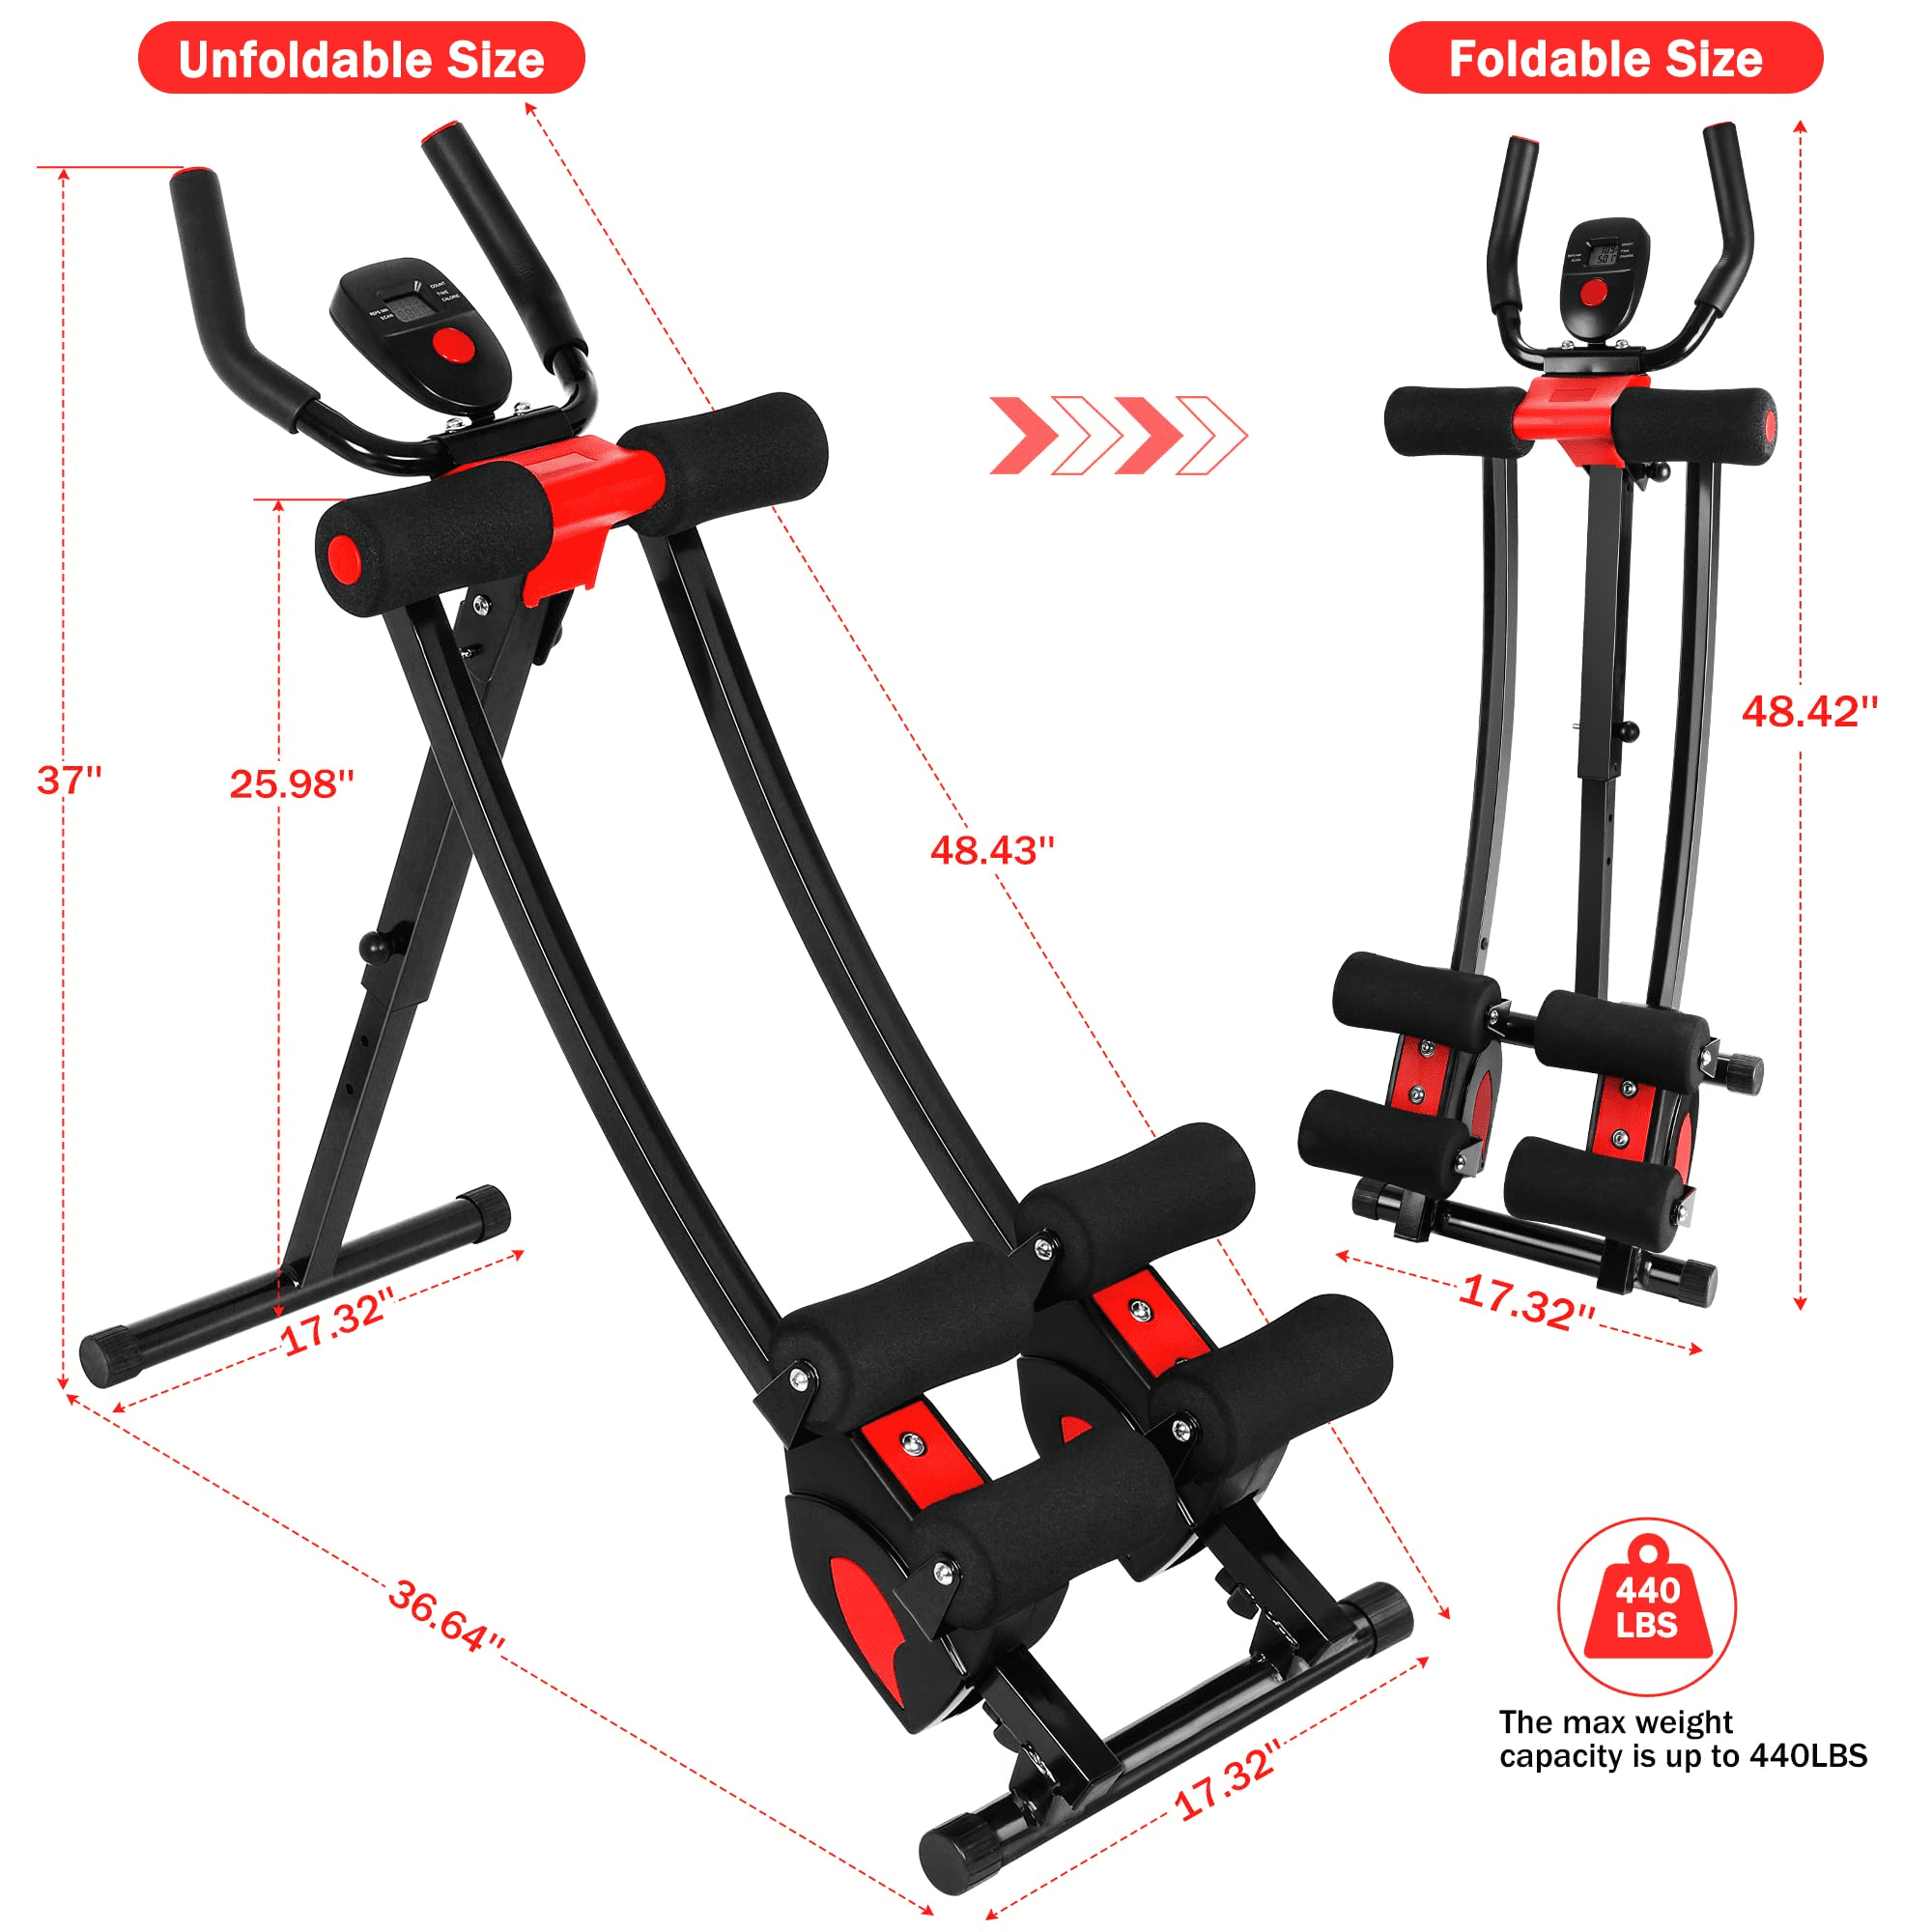 GIKPAL Ab Machine Ab Workout Equipment for Home Gym Foldable Core & Abdominal Trainer Women Exercise Fitness Equipment with LCD Display 440lbs Weight Capacity 